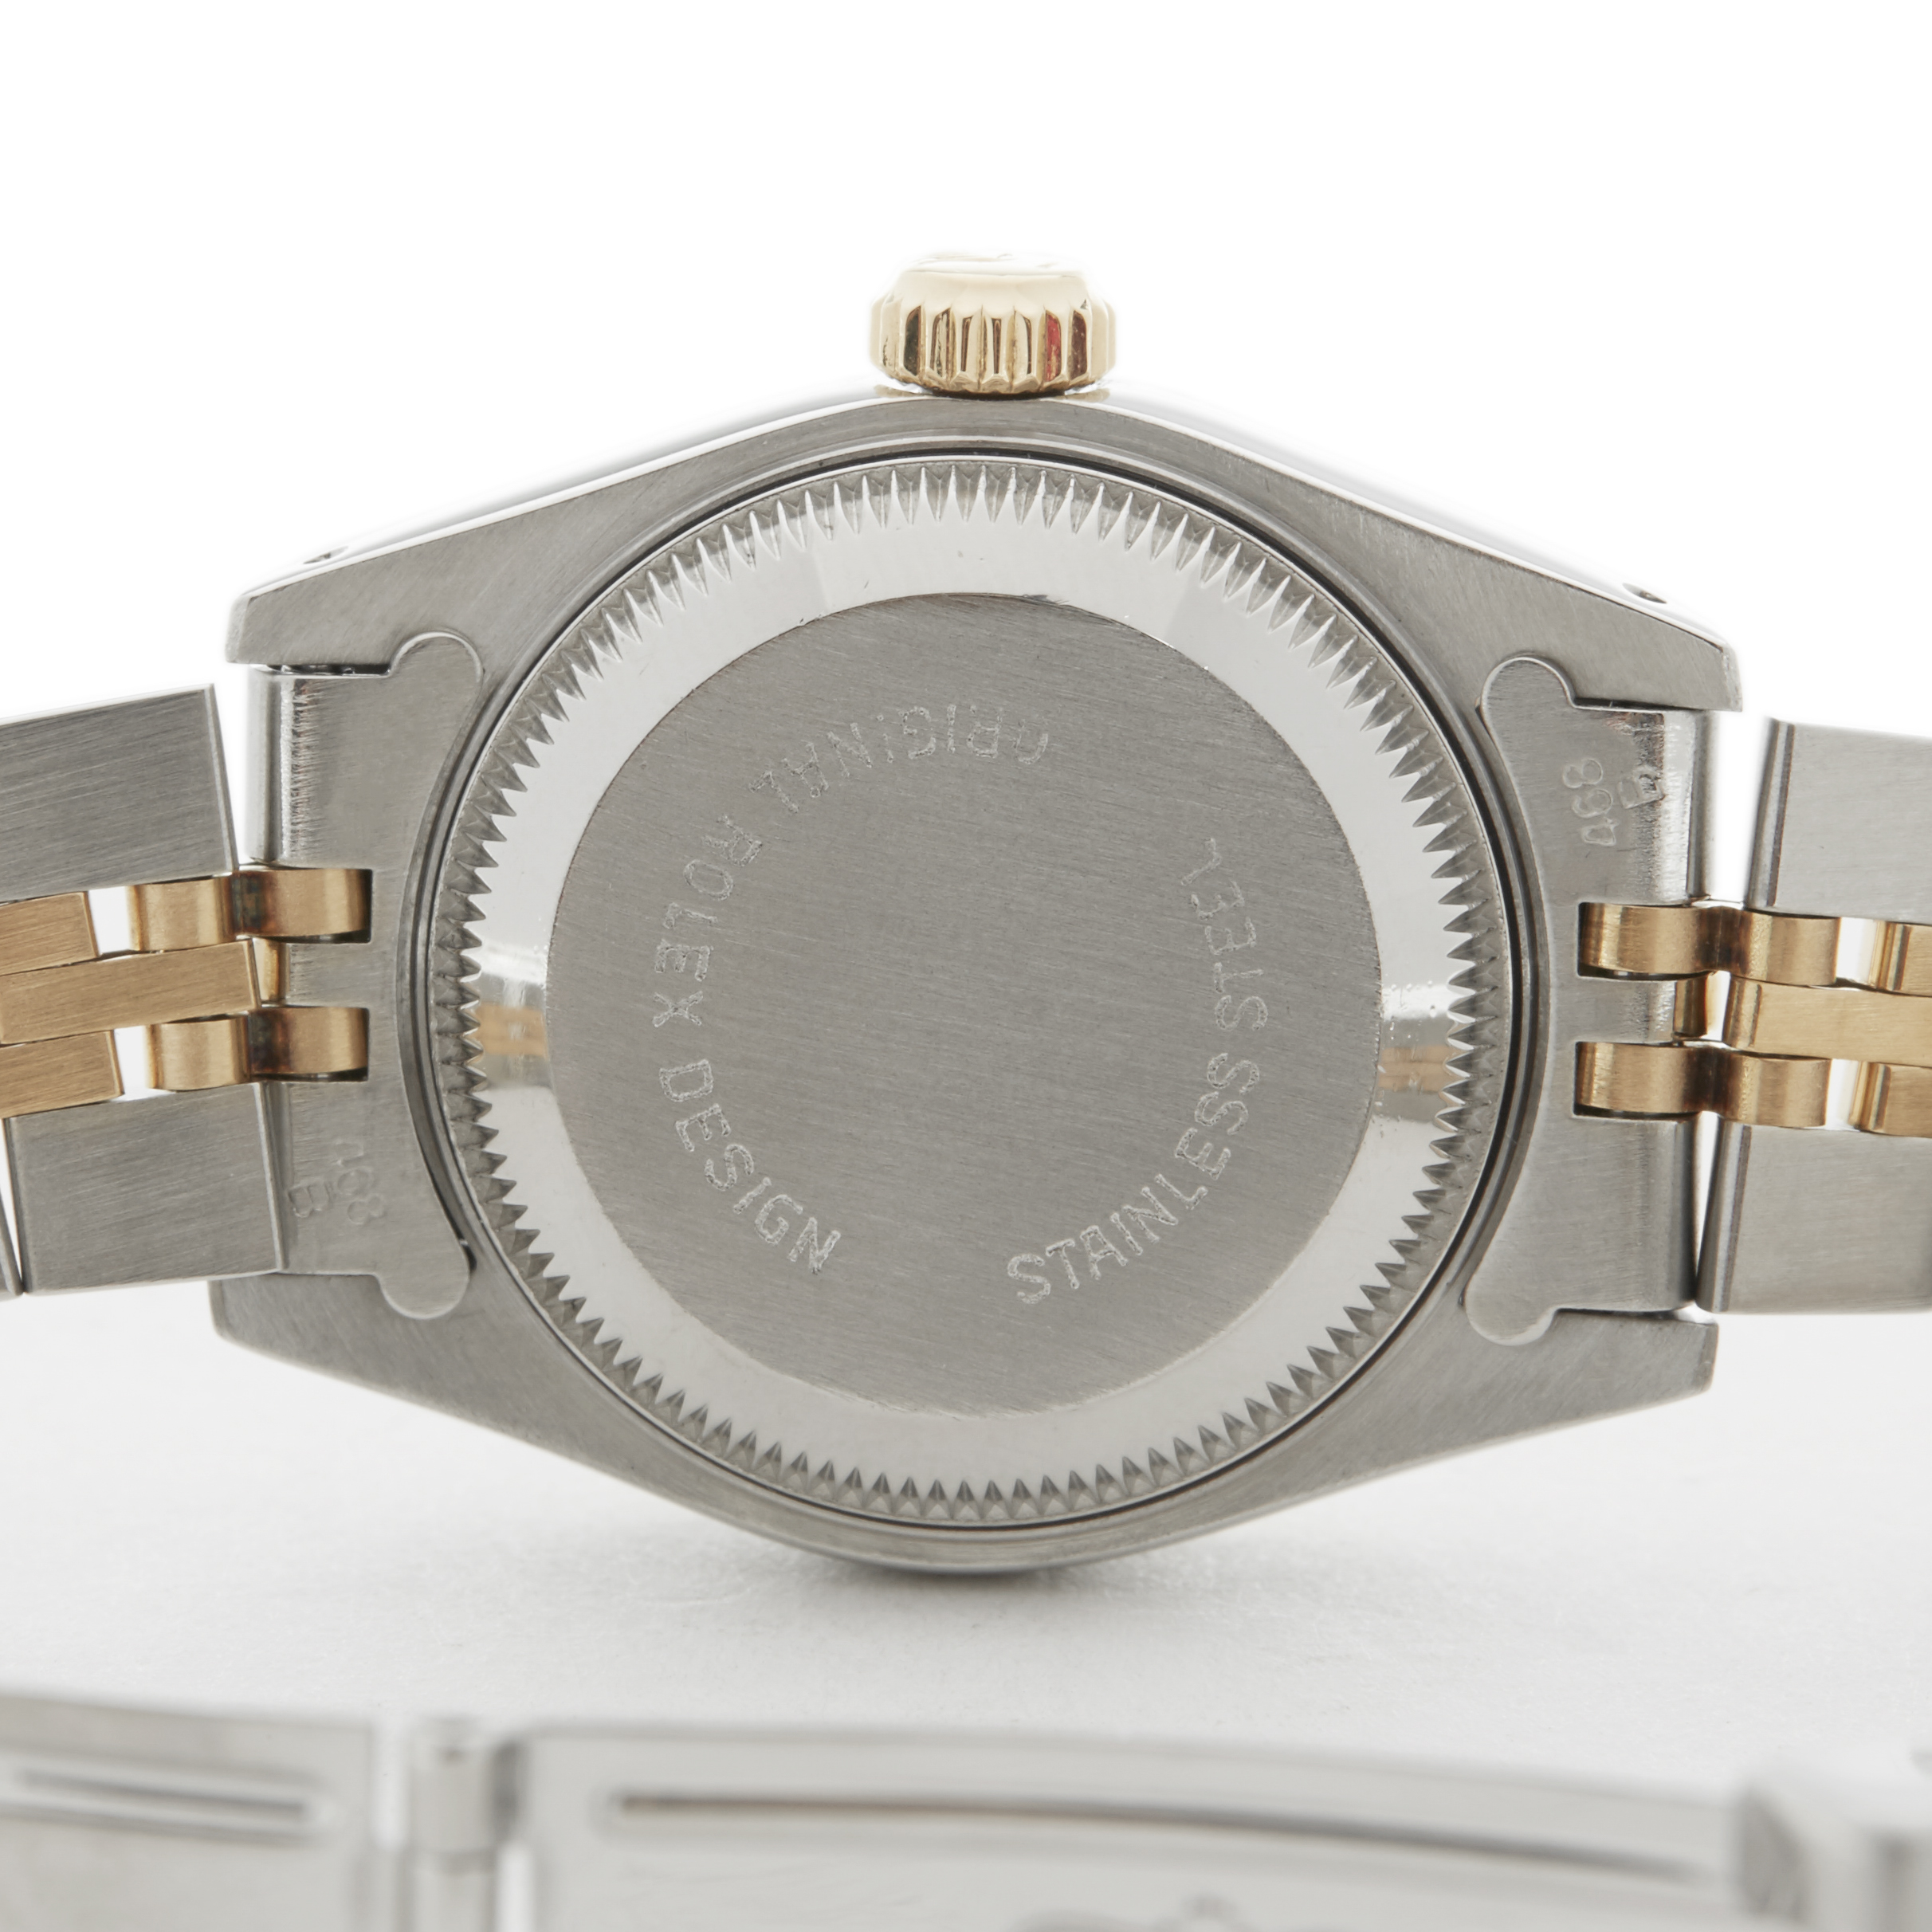 Rolex Datejust 26mm Stainless Steel & 18k Yellow Gold 69173 - Image 8 of 8